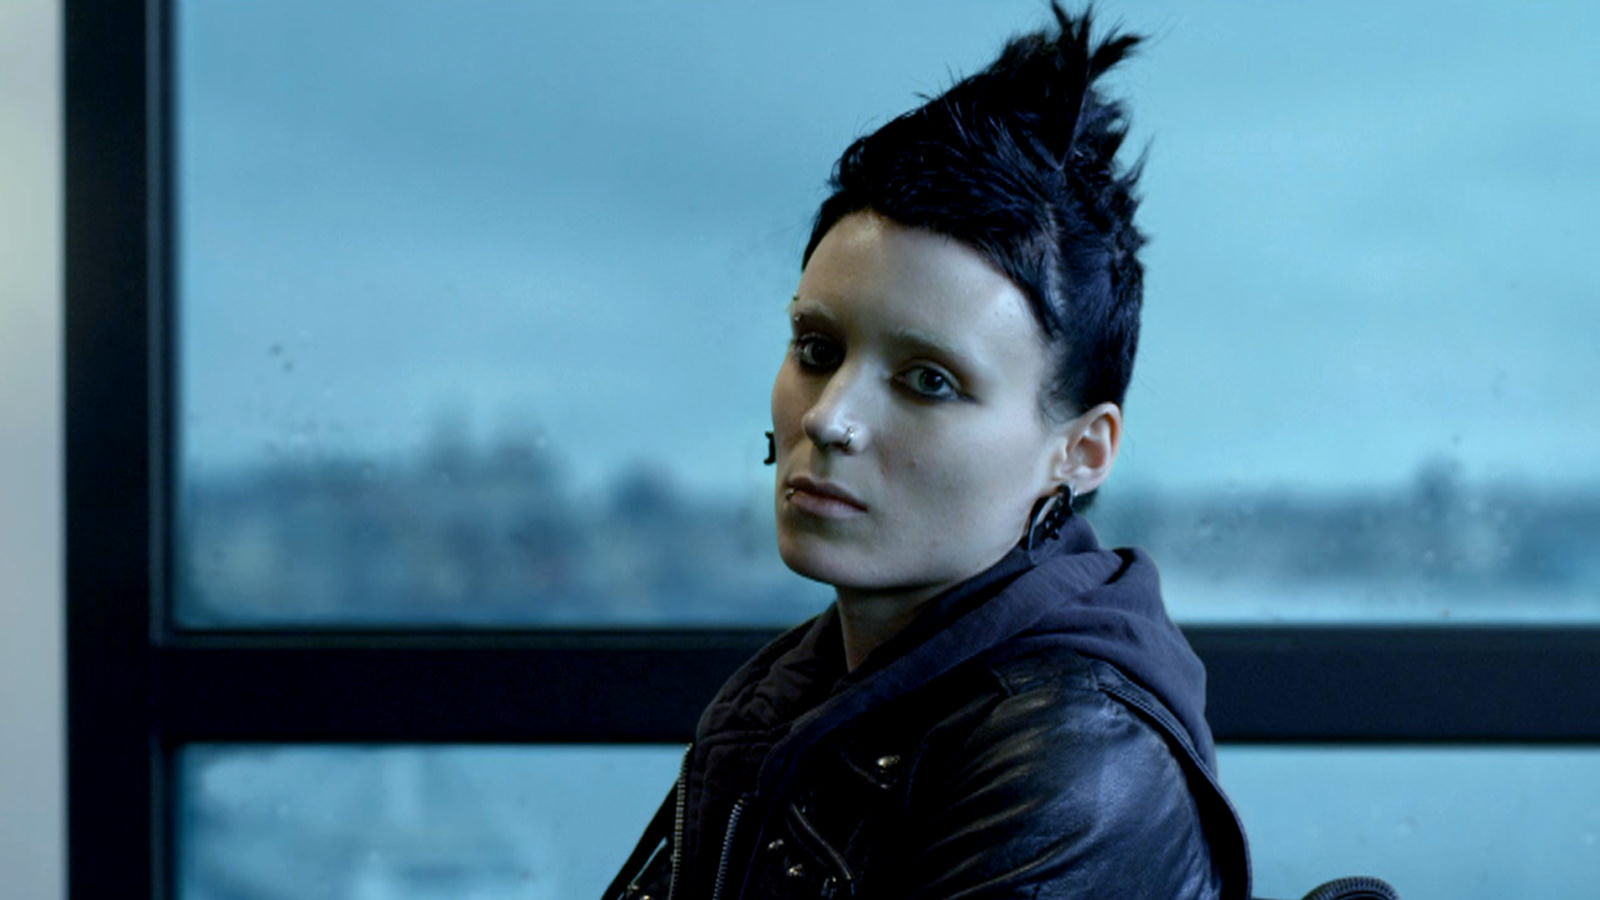 158710_behind-the-scenes-rooney-mara-in-the-girl-with-the-dragon-tattoo